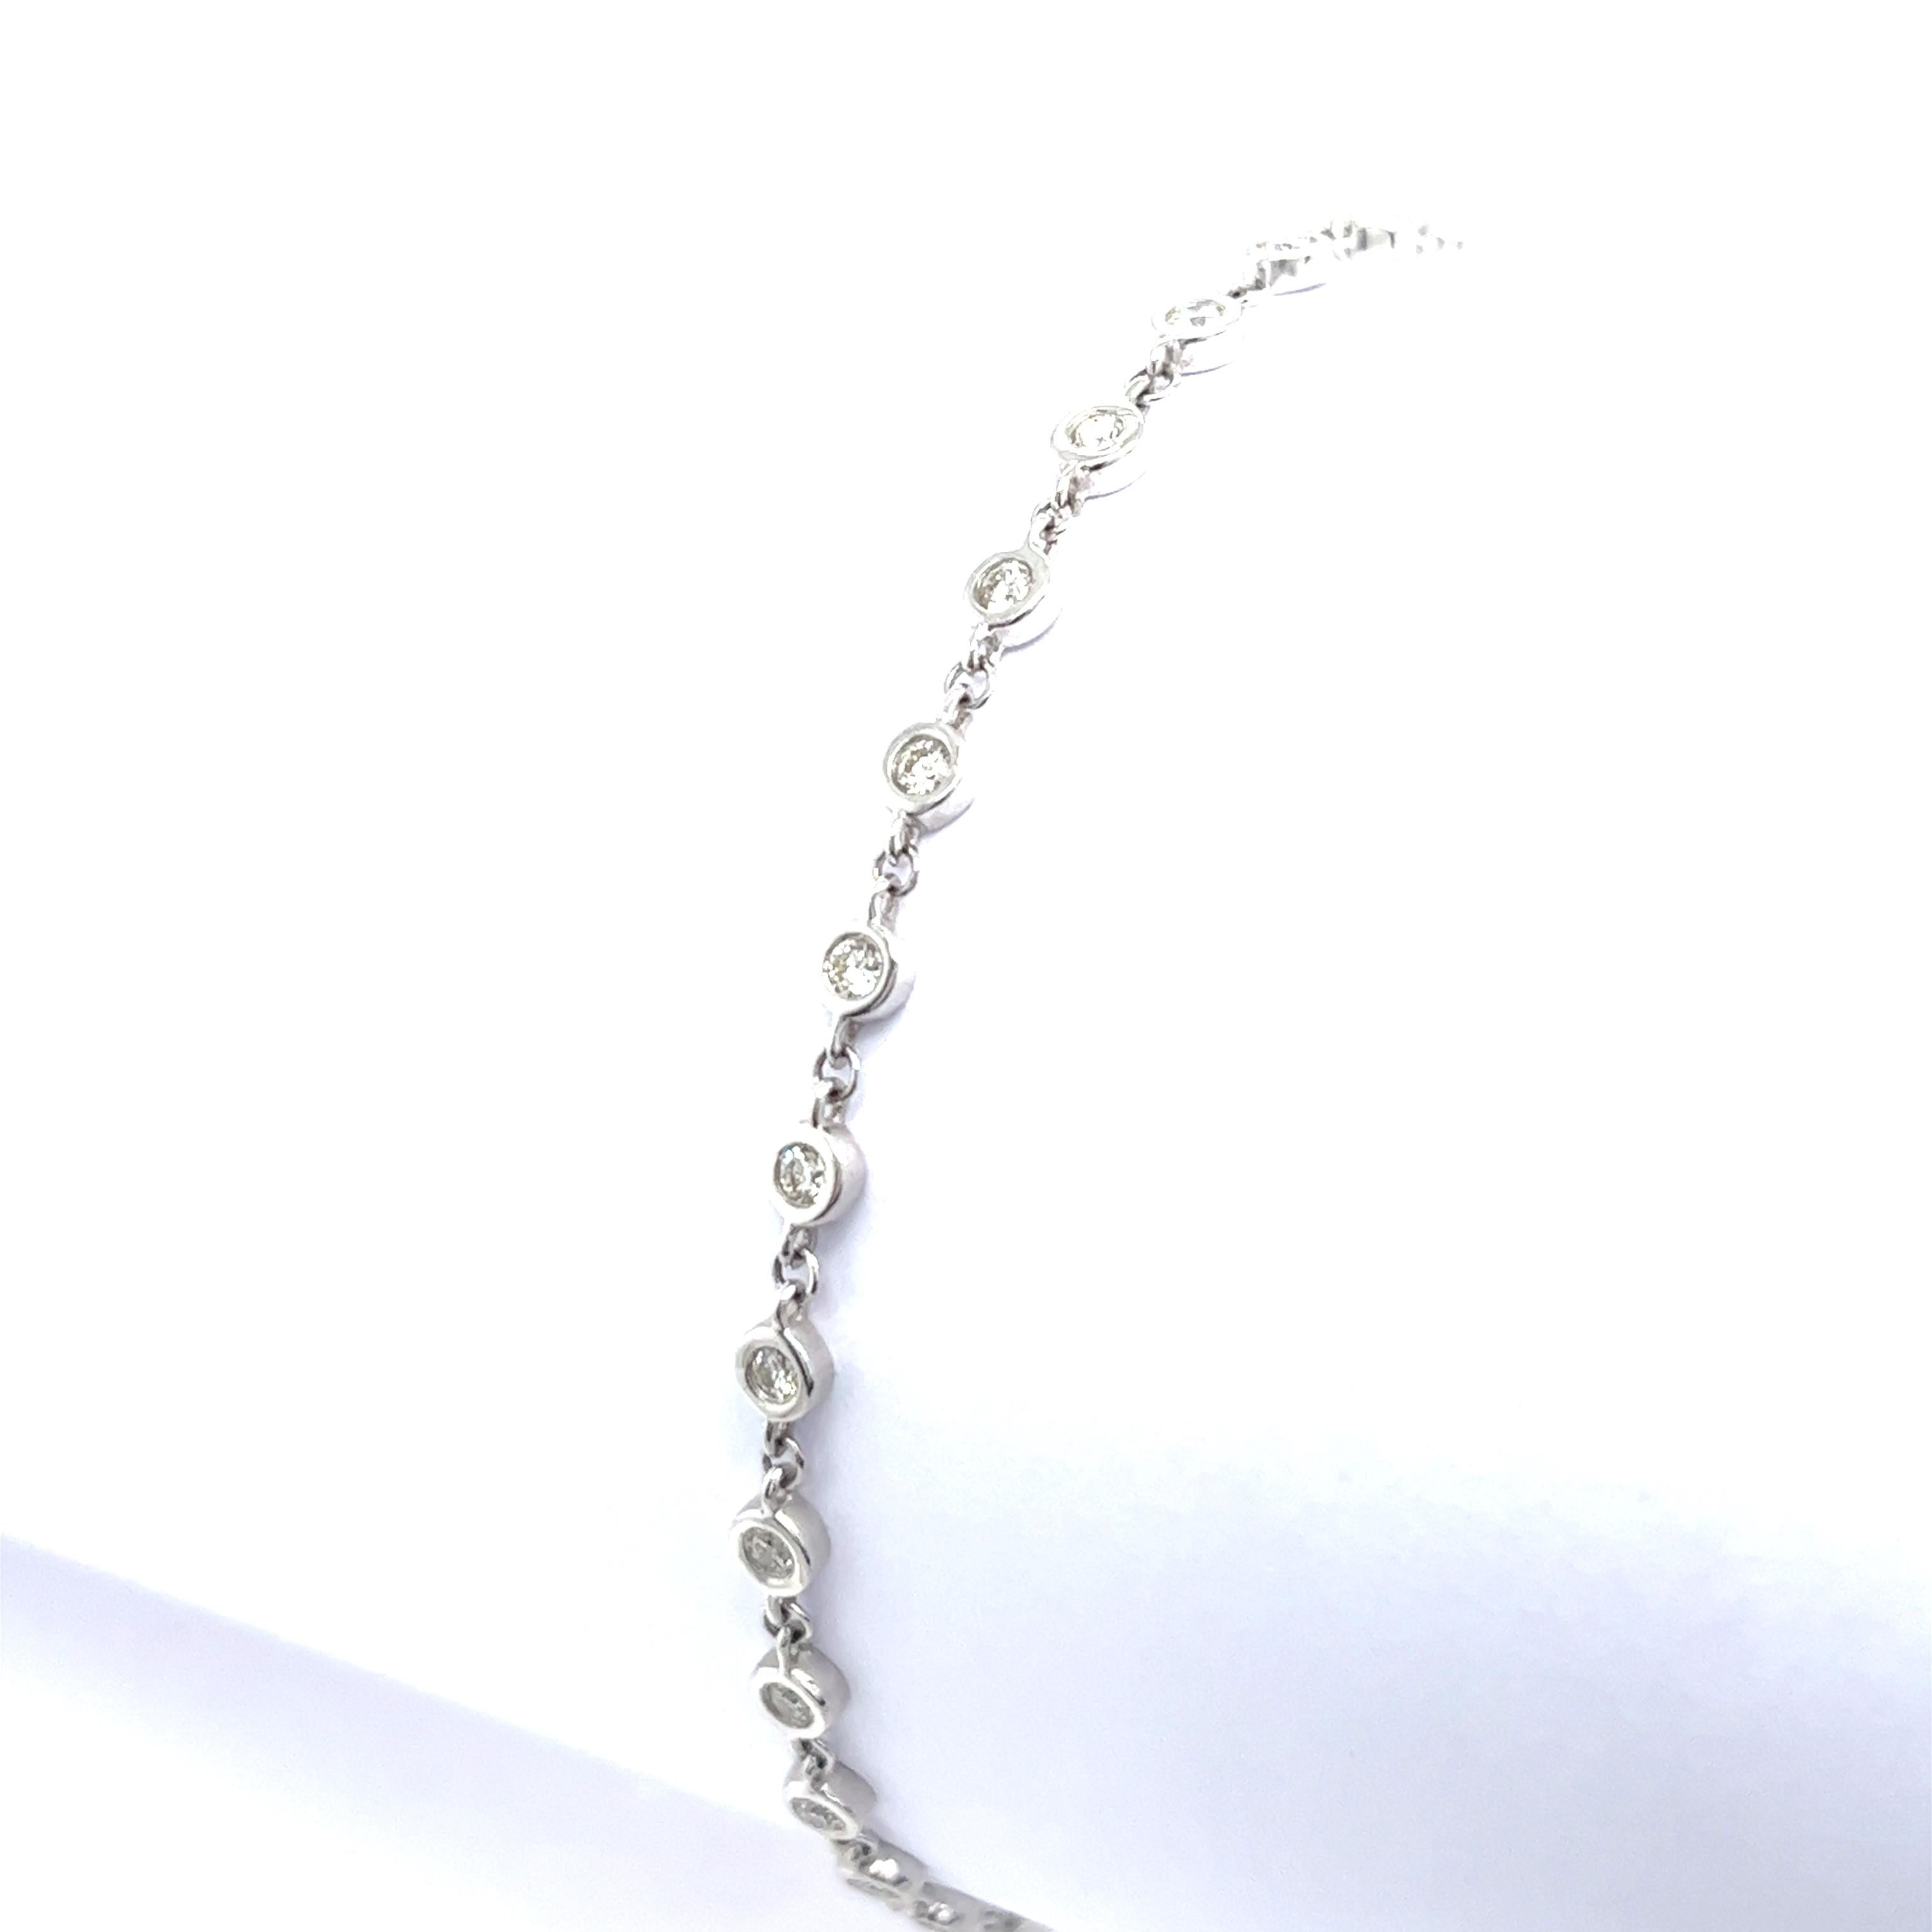 Ladies Diamond Rubover Bracelet Set with 29 Bezel Diamonds in 18ct White Gold In New Condition For Sale In London, GB